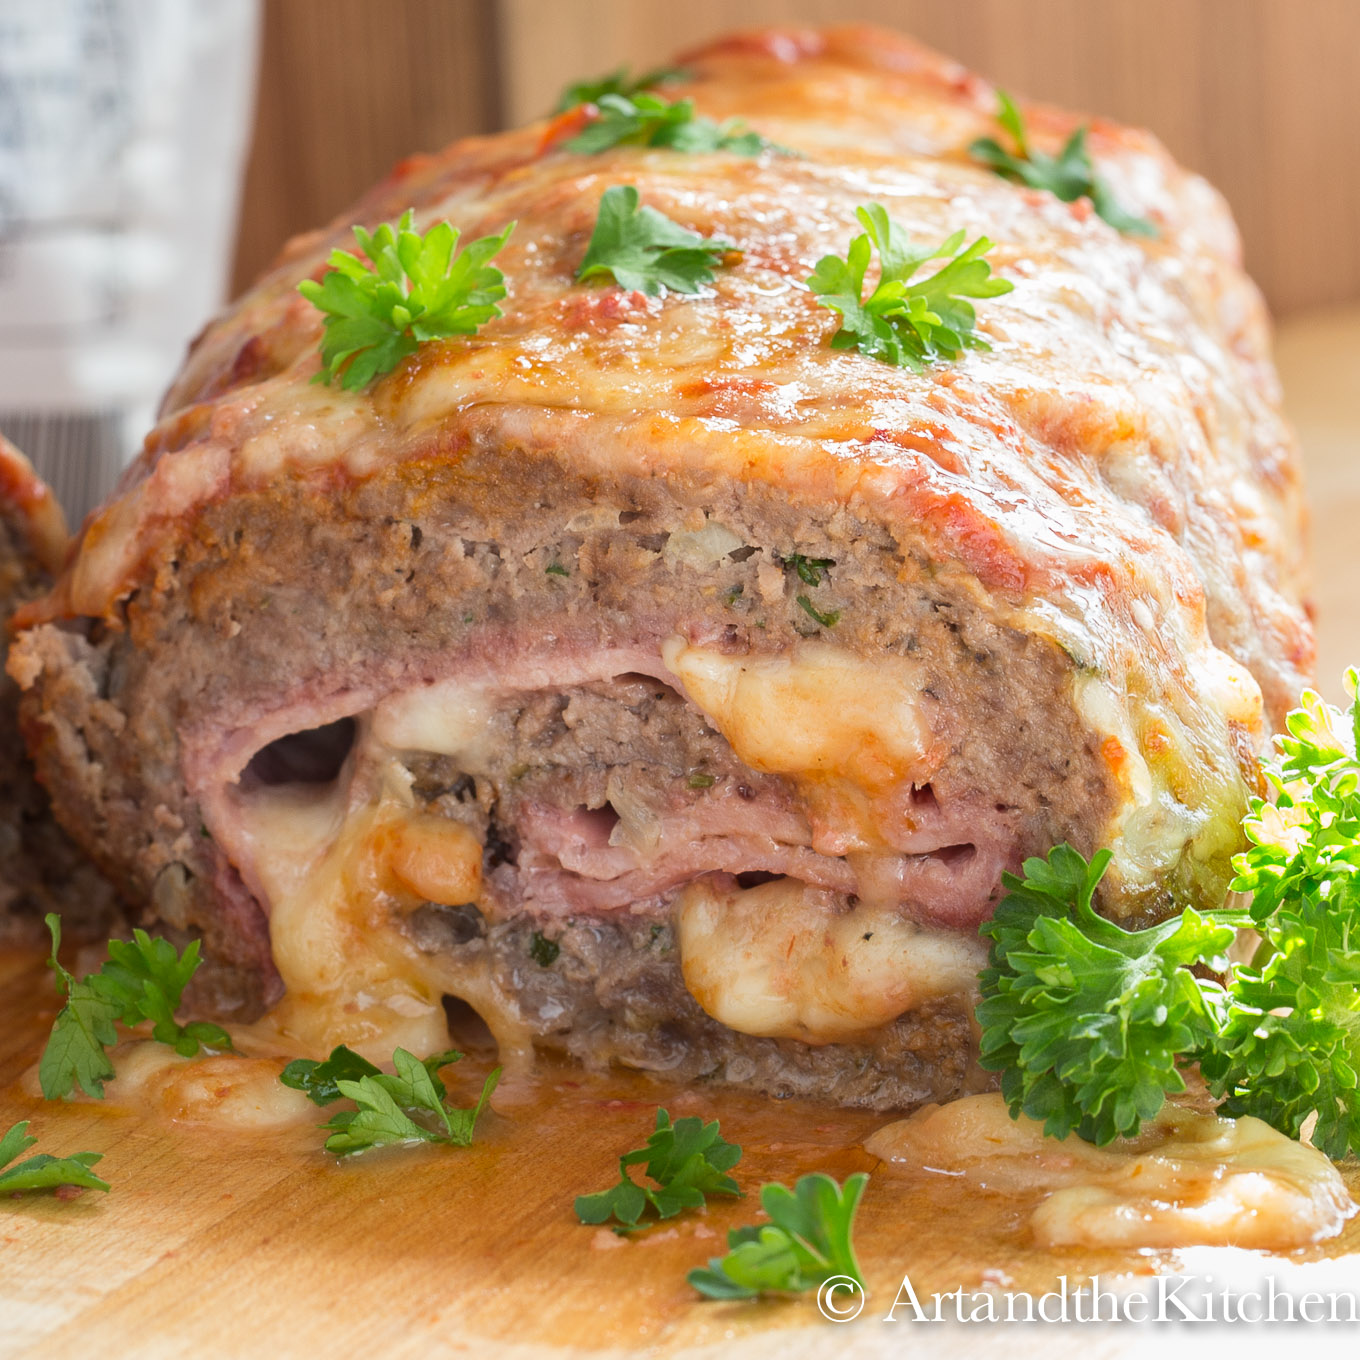 Meatloaf stuffed with ham and mozzarella cheese, garnished with parsley leaves.